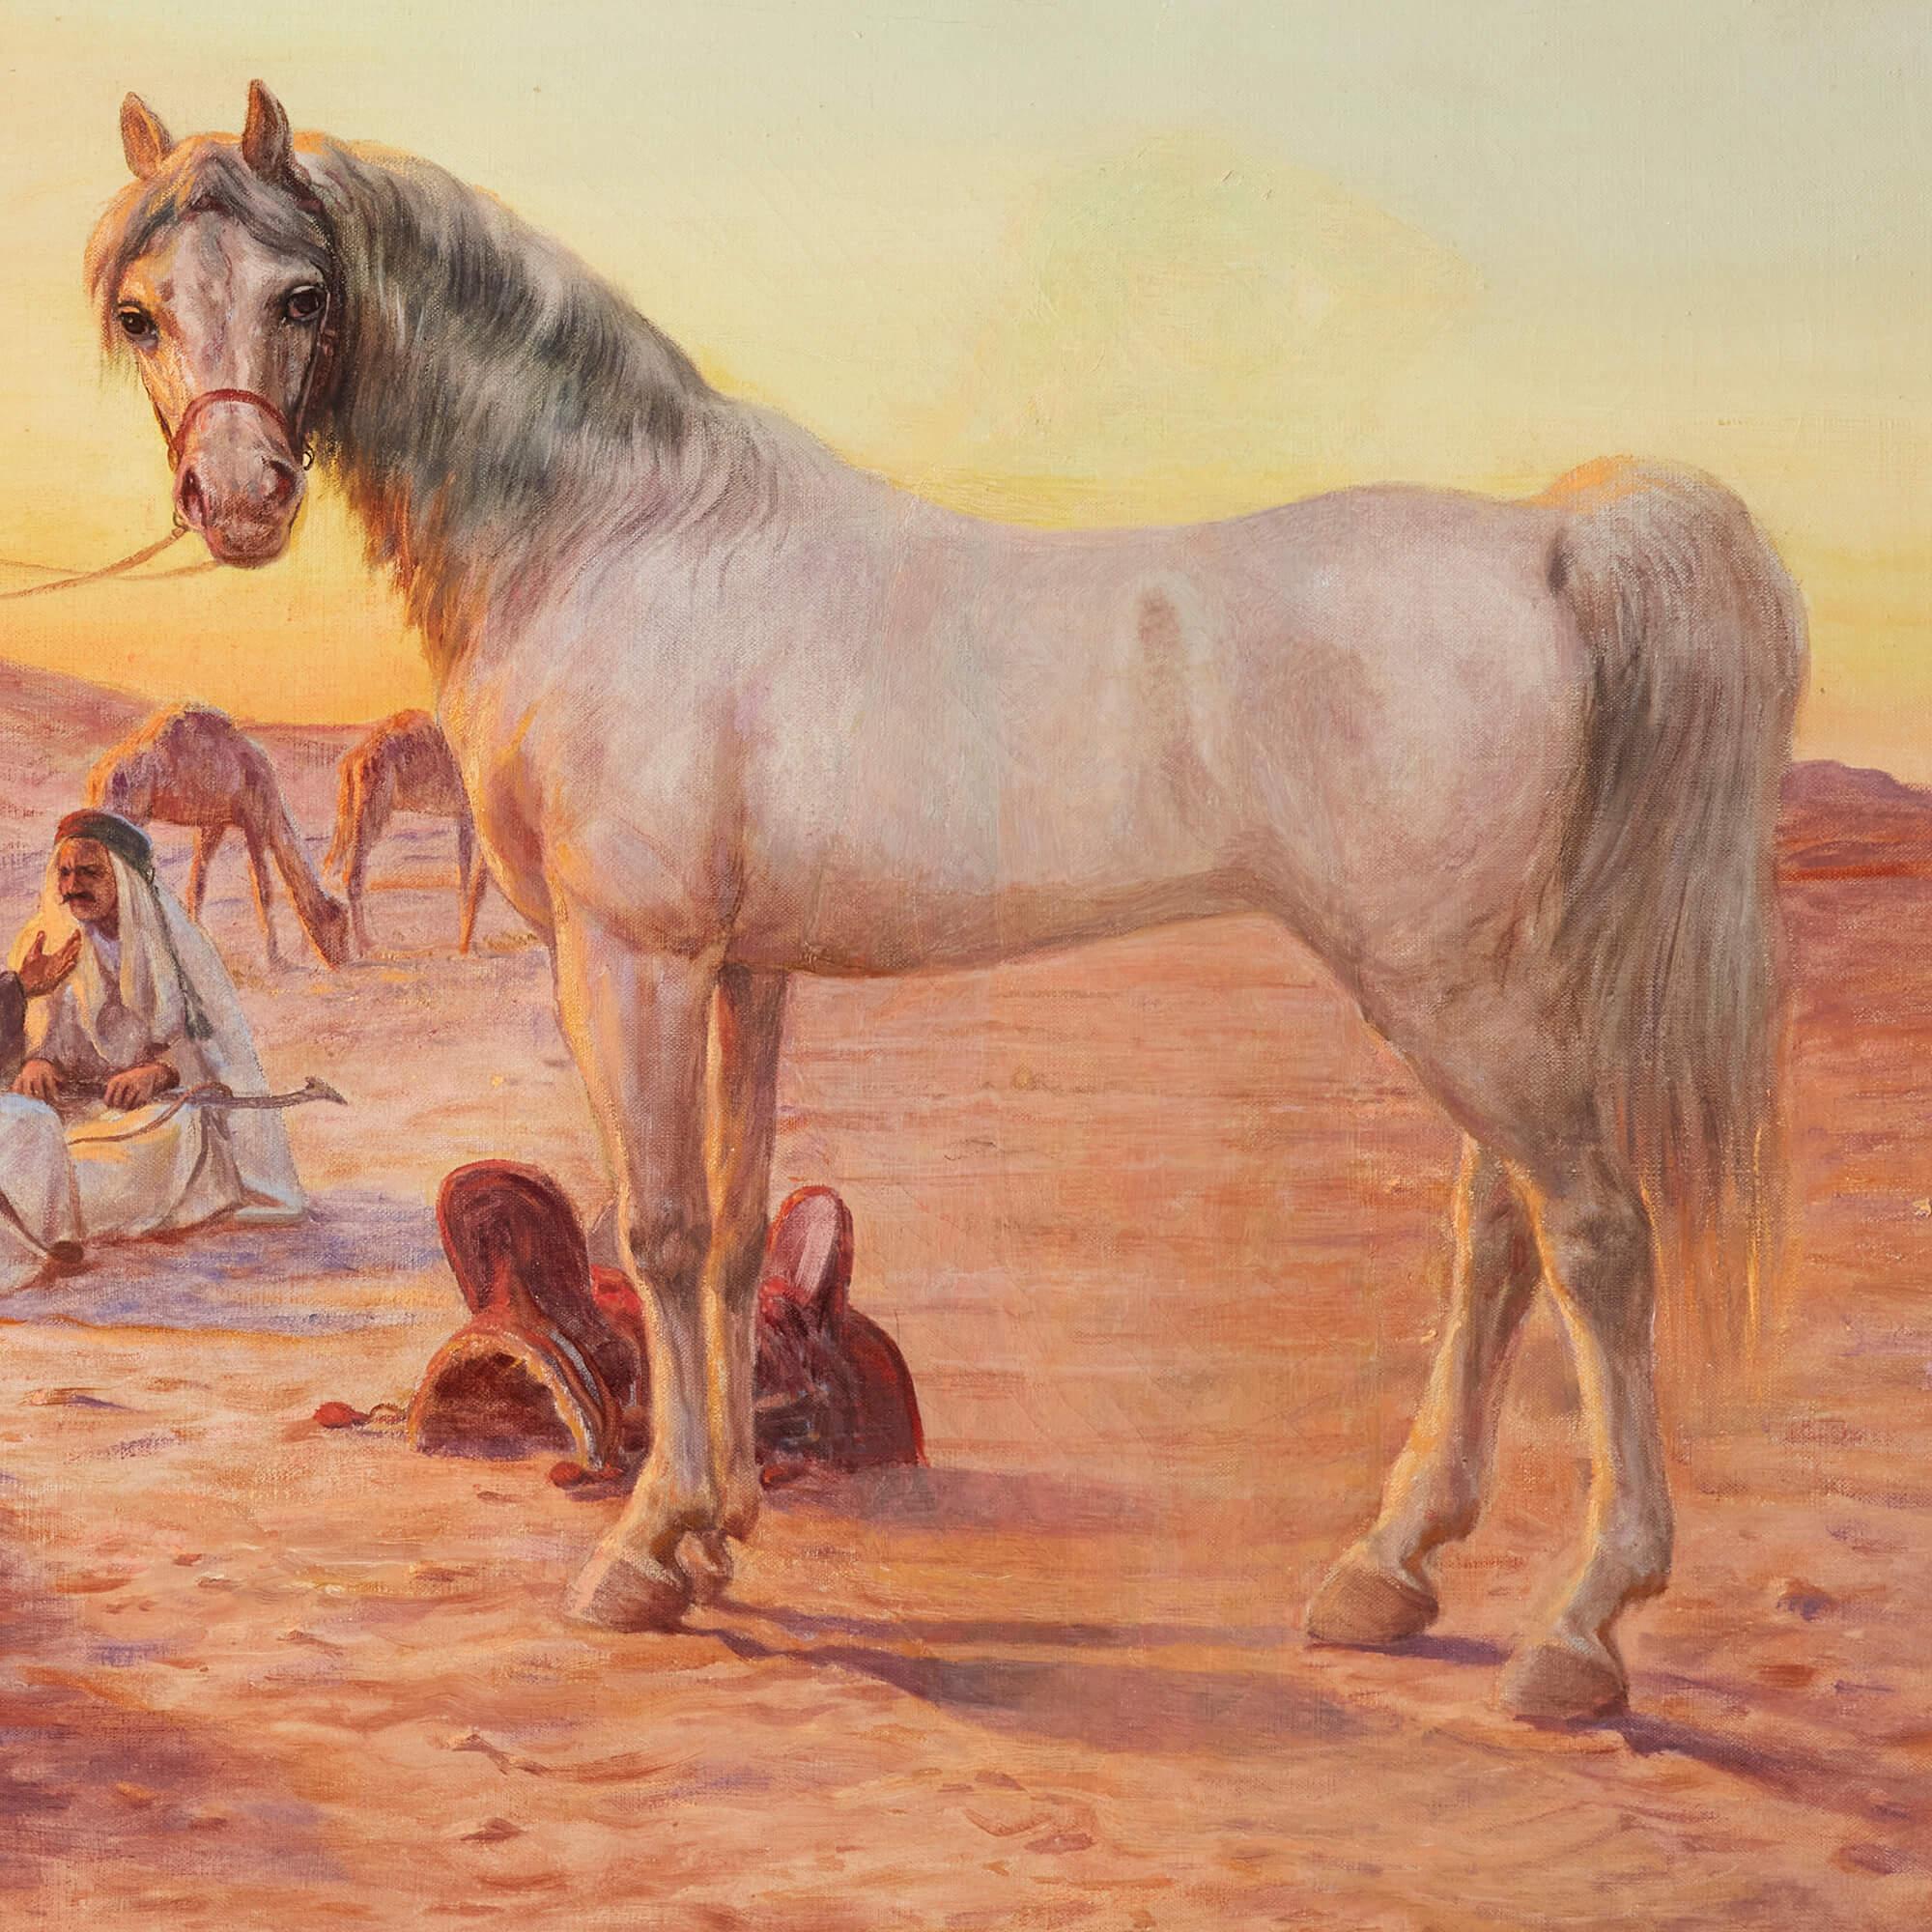 Orientalist Oil Painting Depicting the Trade of a Horse by Pilny For Sale 2